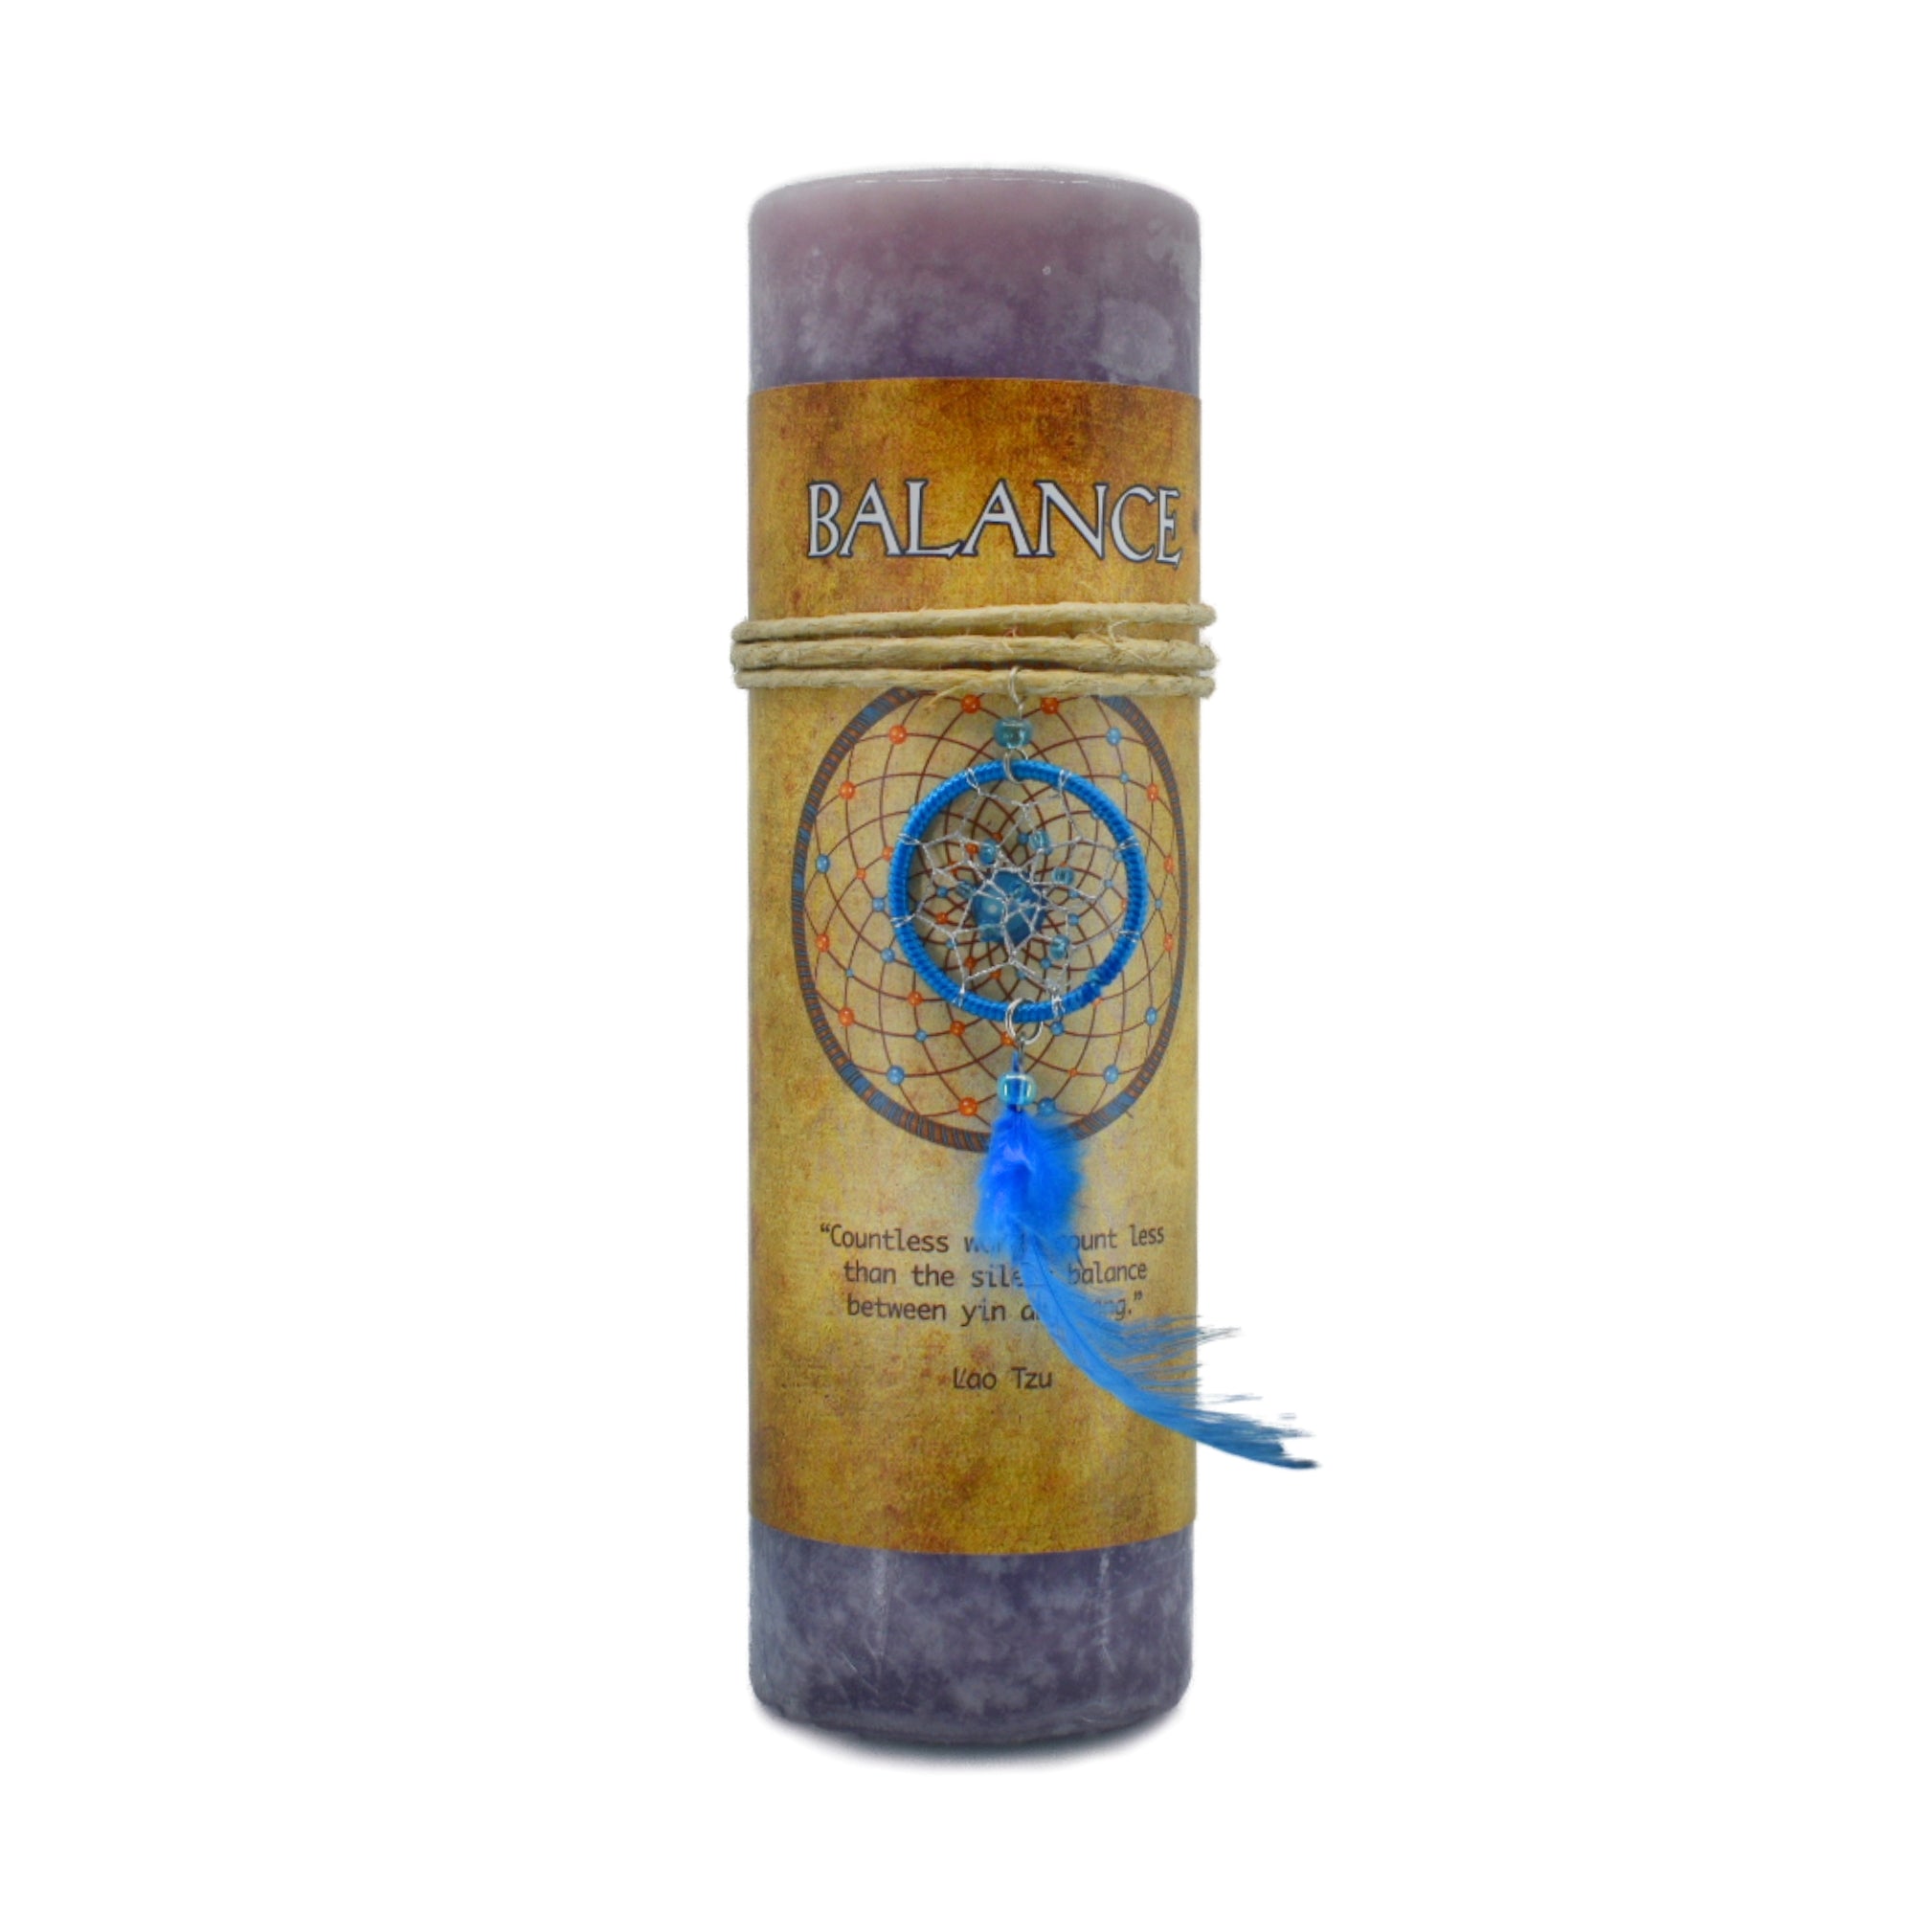 Balance Dream Catcher Candle has a blue dream catcher on it that can be worn or hung.  Purple scented candle used for meditation to bring balance into your life.